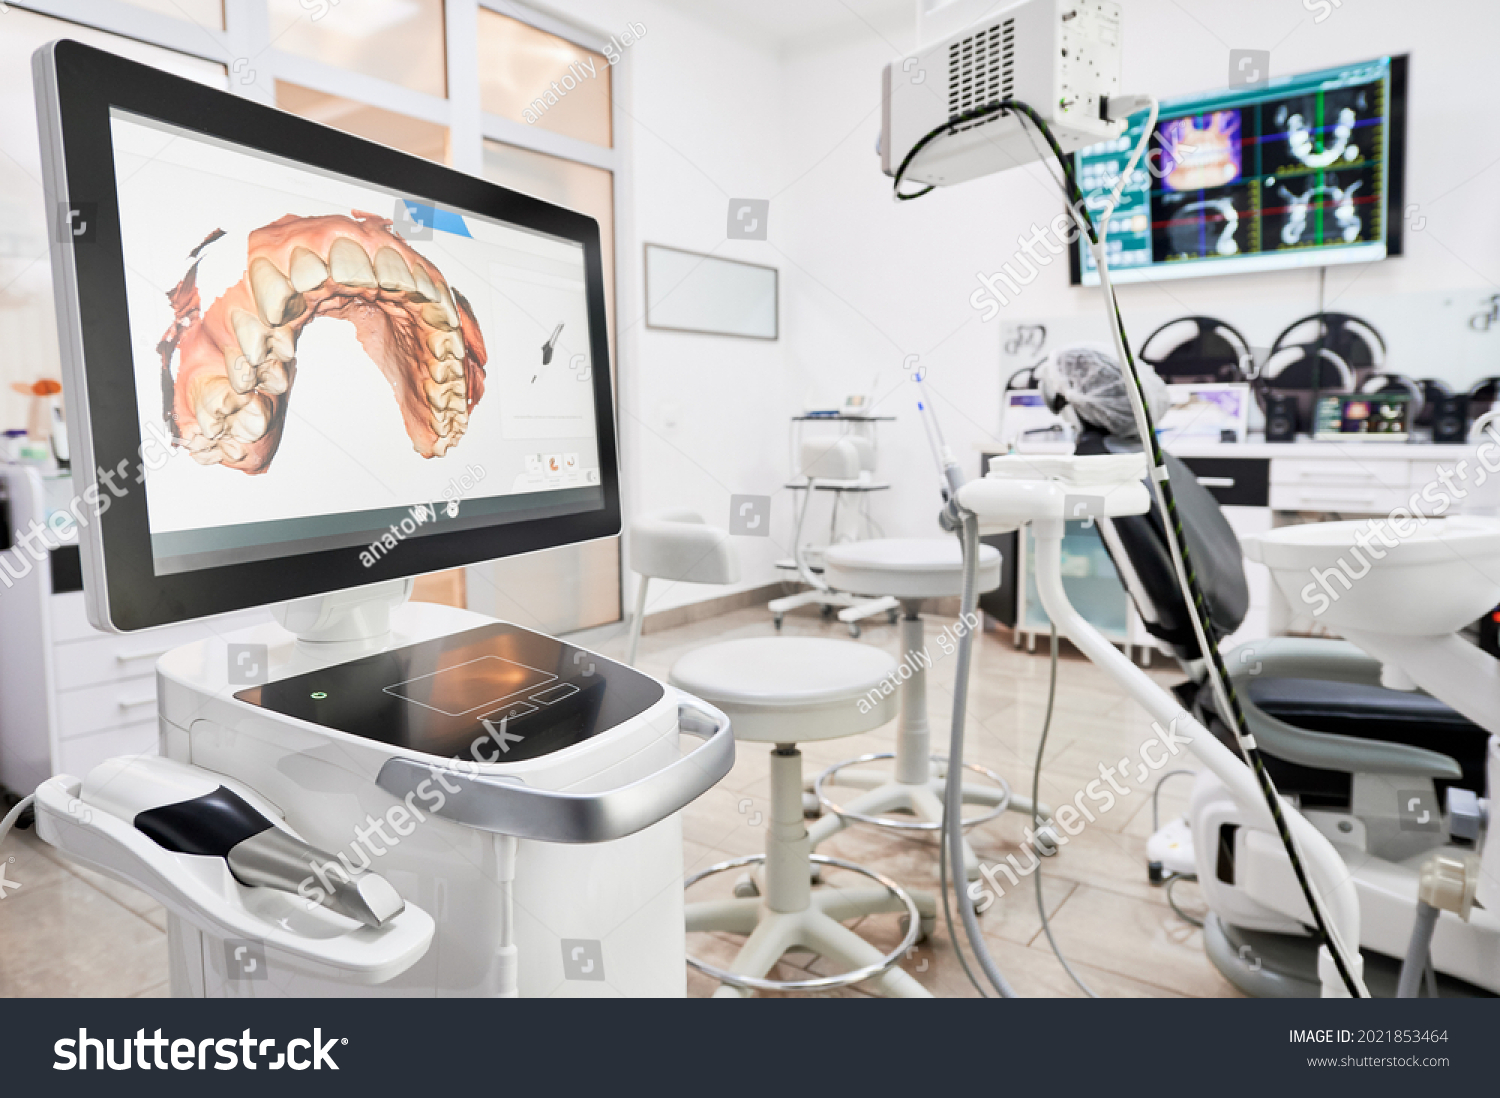 Interior of dental office with modern equipment and dental intraoral scanner with teeth on display, medical system for intraoral scanning. Concept of digital dentistry and dental scanning technology. #2021853464